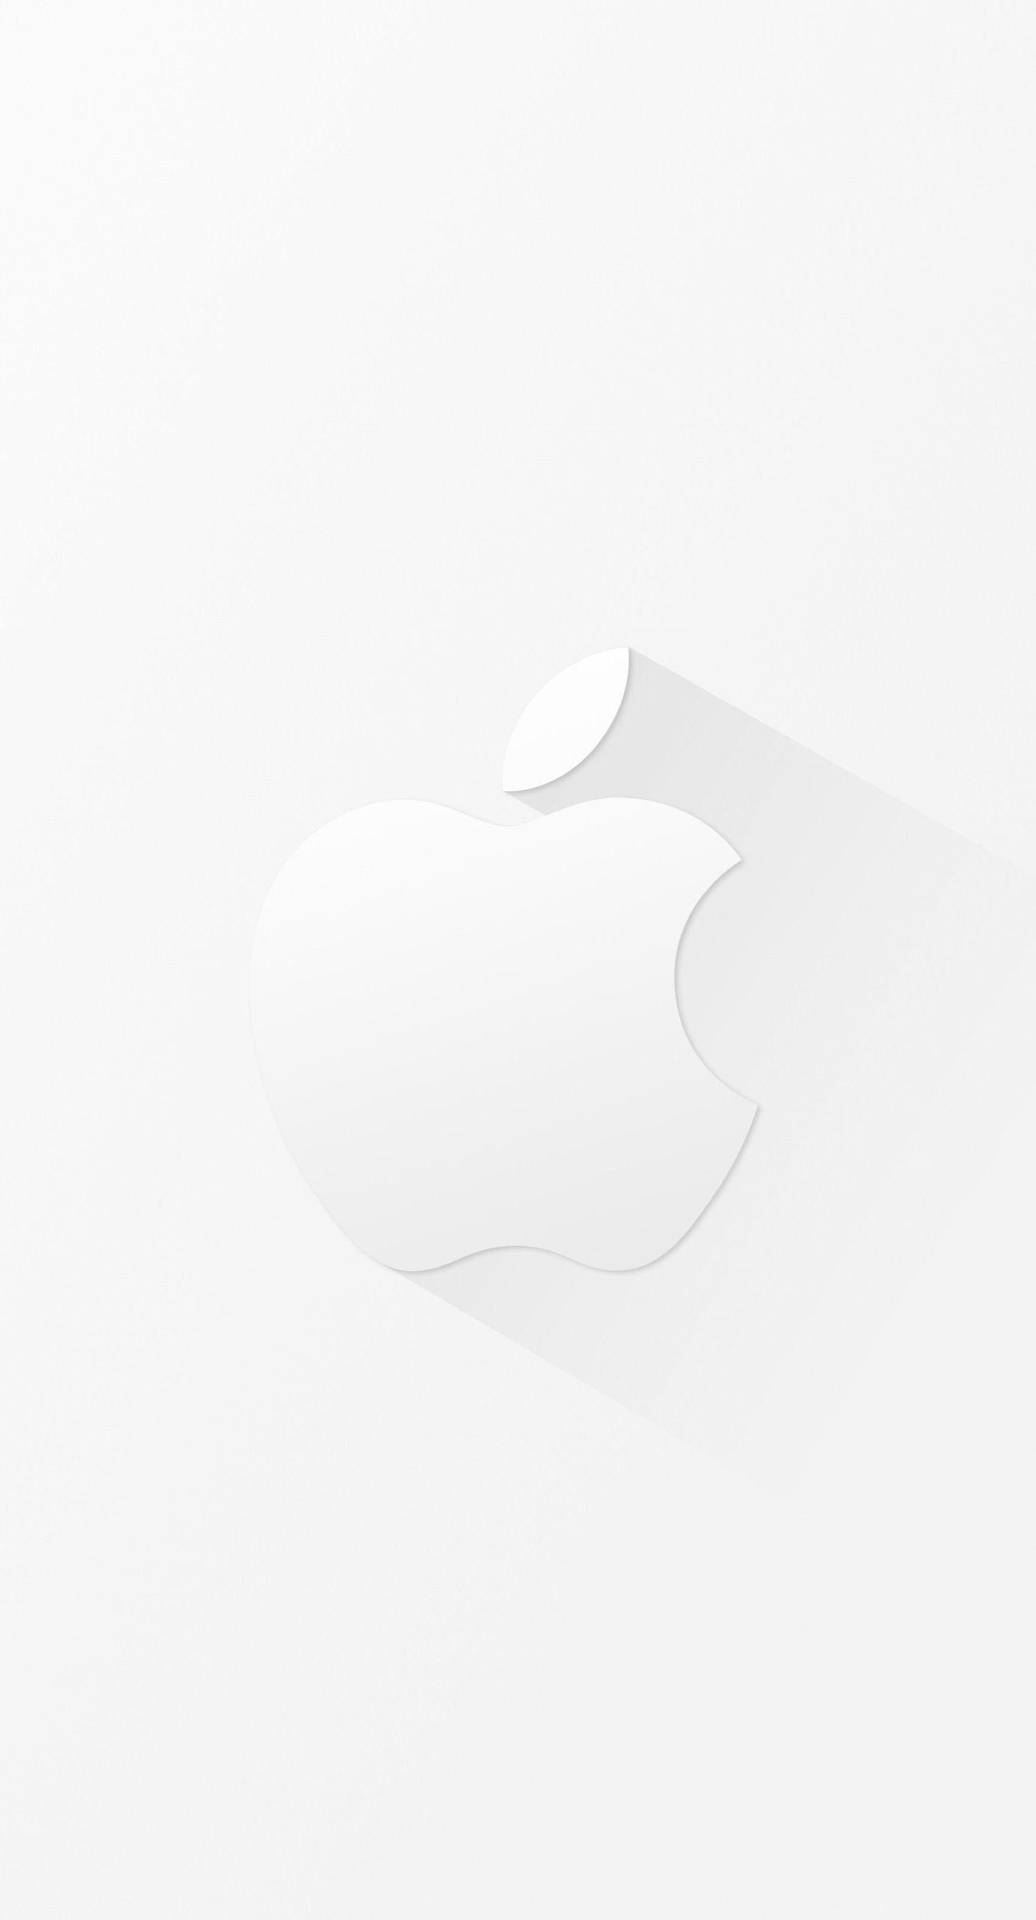 Cool White Apple Background